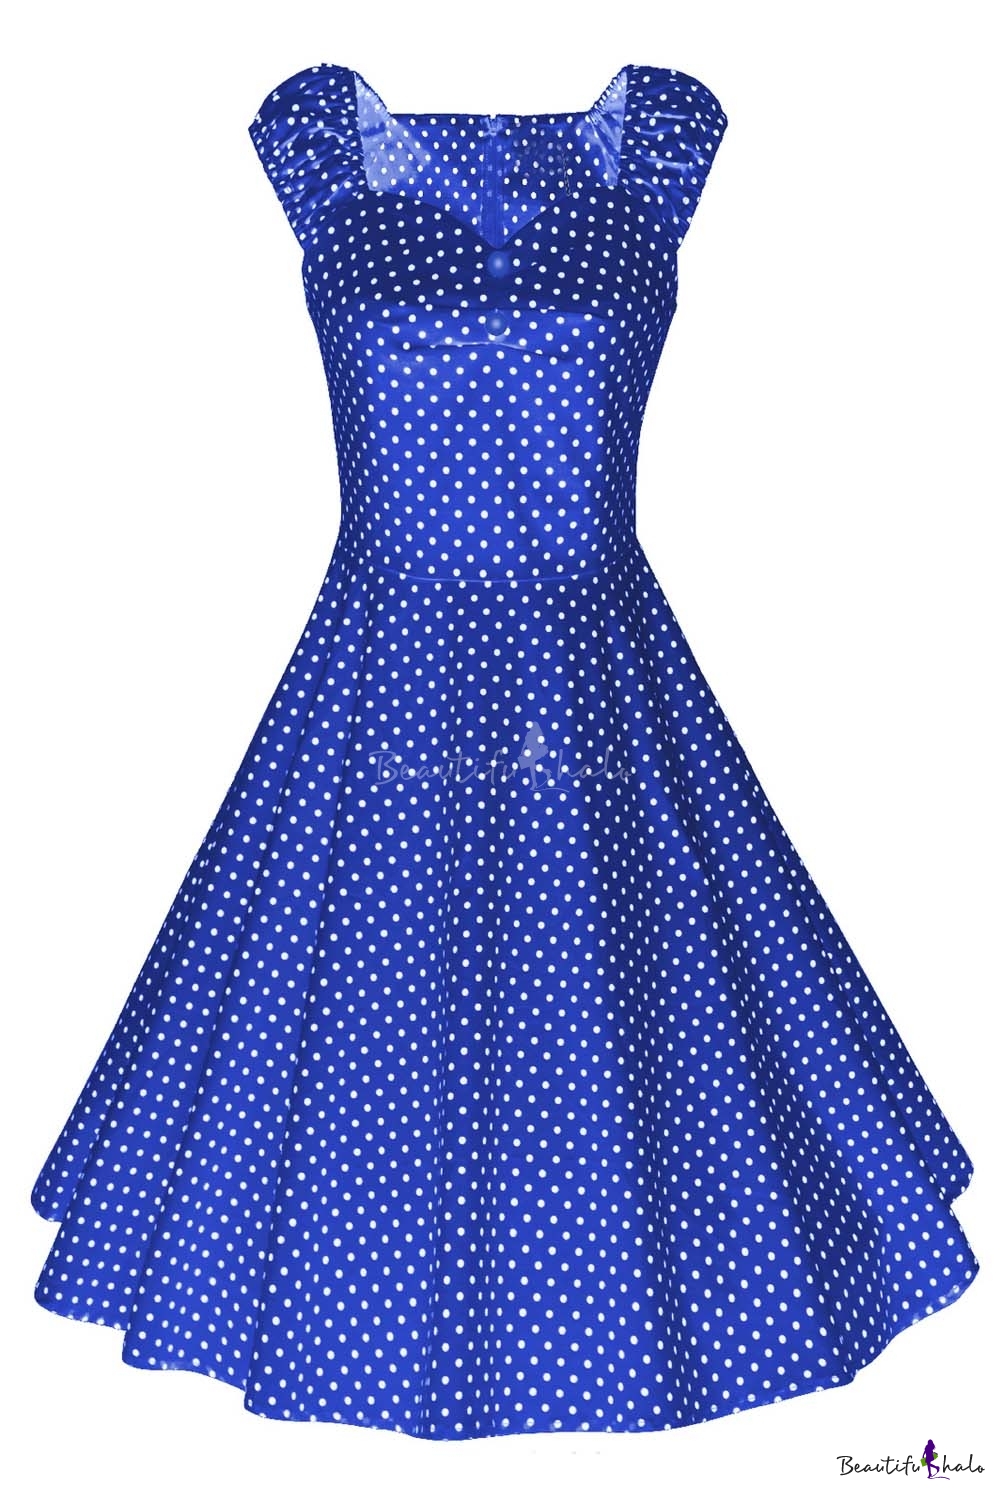 Women's 1950s Style Vintage Swing Party Dress - Beautifulhalo.com